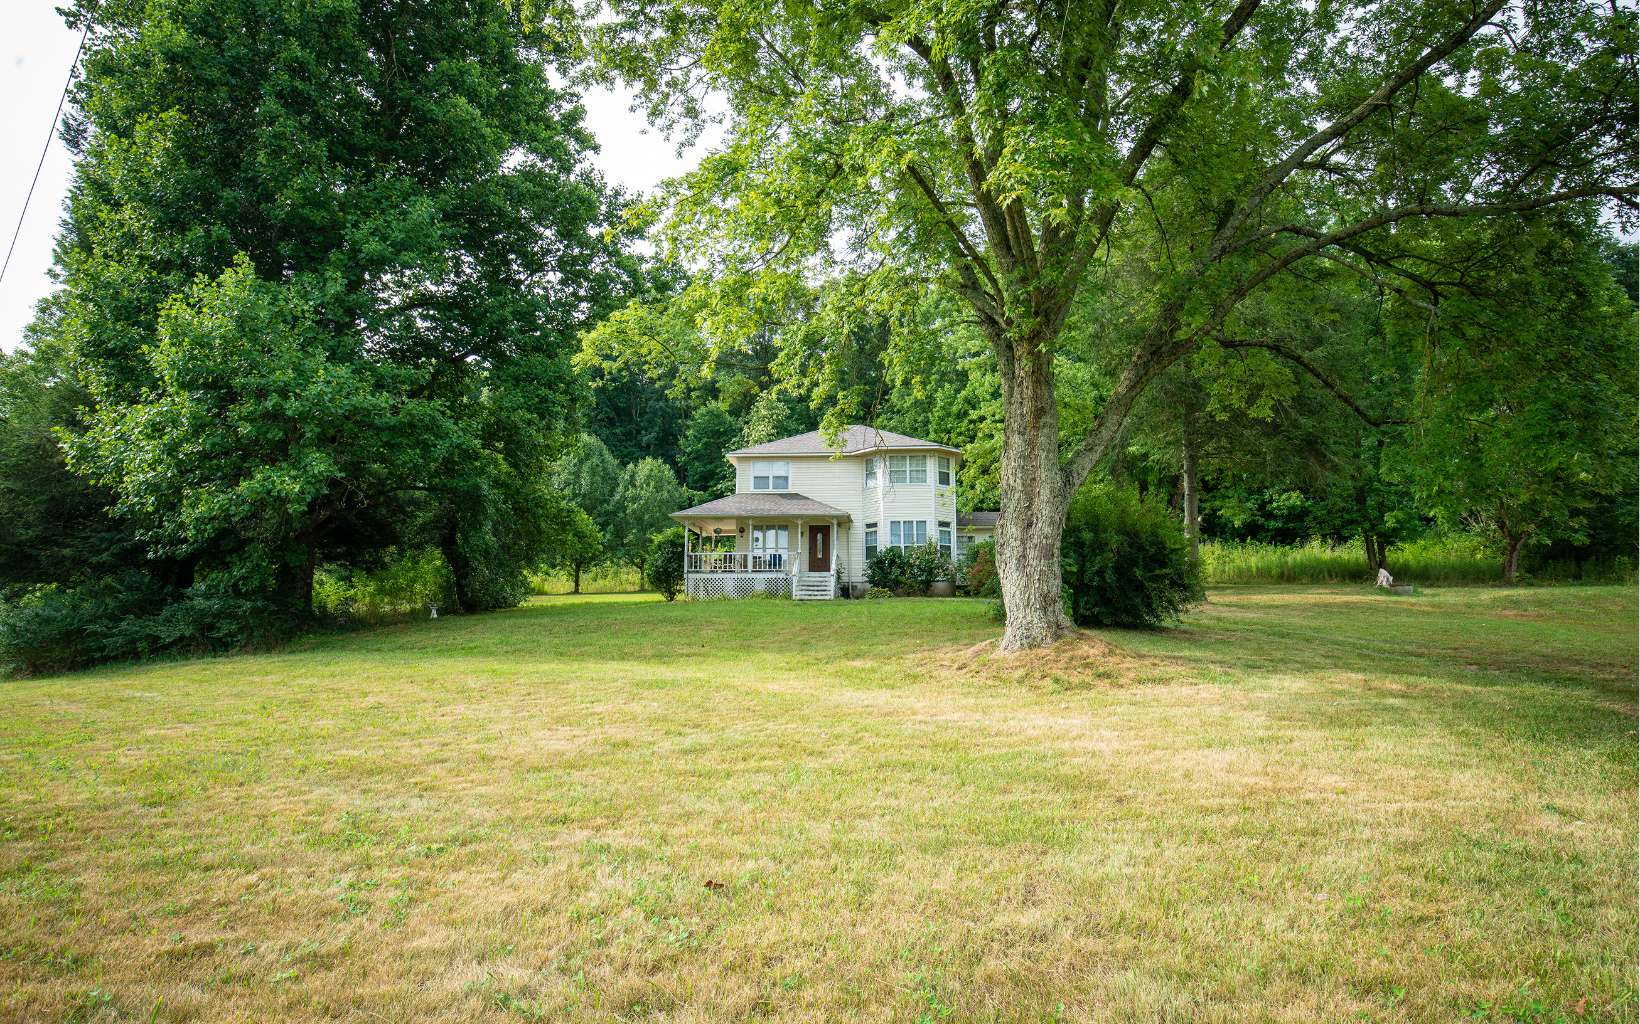 Adorable farmhouse style home on sprawling lot. Private drive, gorgeous mountain views, wrap-around porch, side sunroom, & back deck. Large living room with fireplace. Breakfast nook with bay window. Primary bedroom suite upstairs has bay window & double closets. Won’t take much to make this one a show stopper!